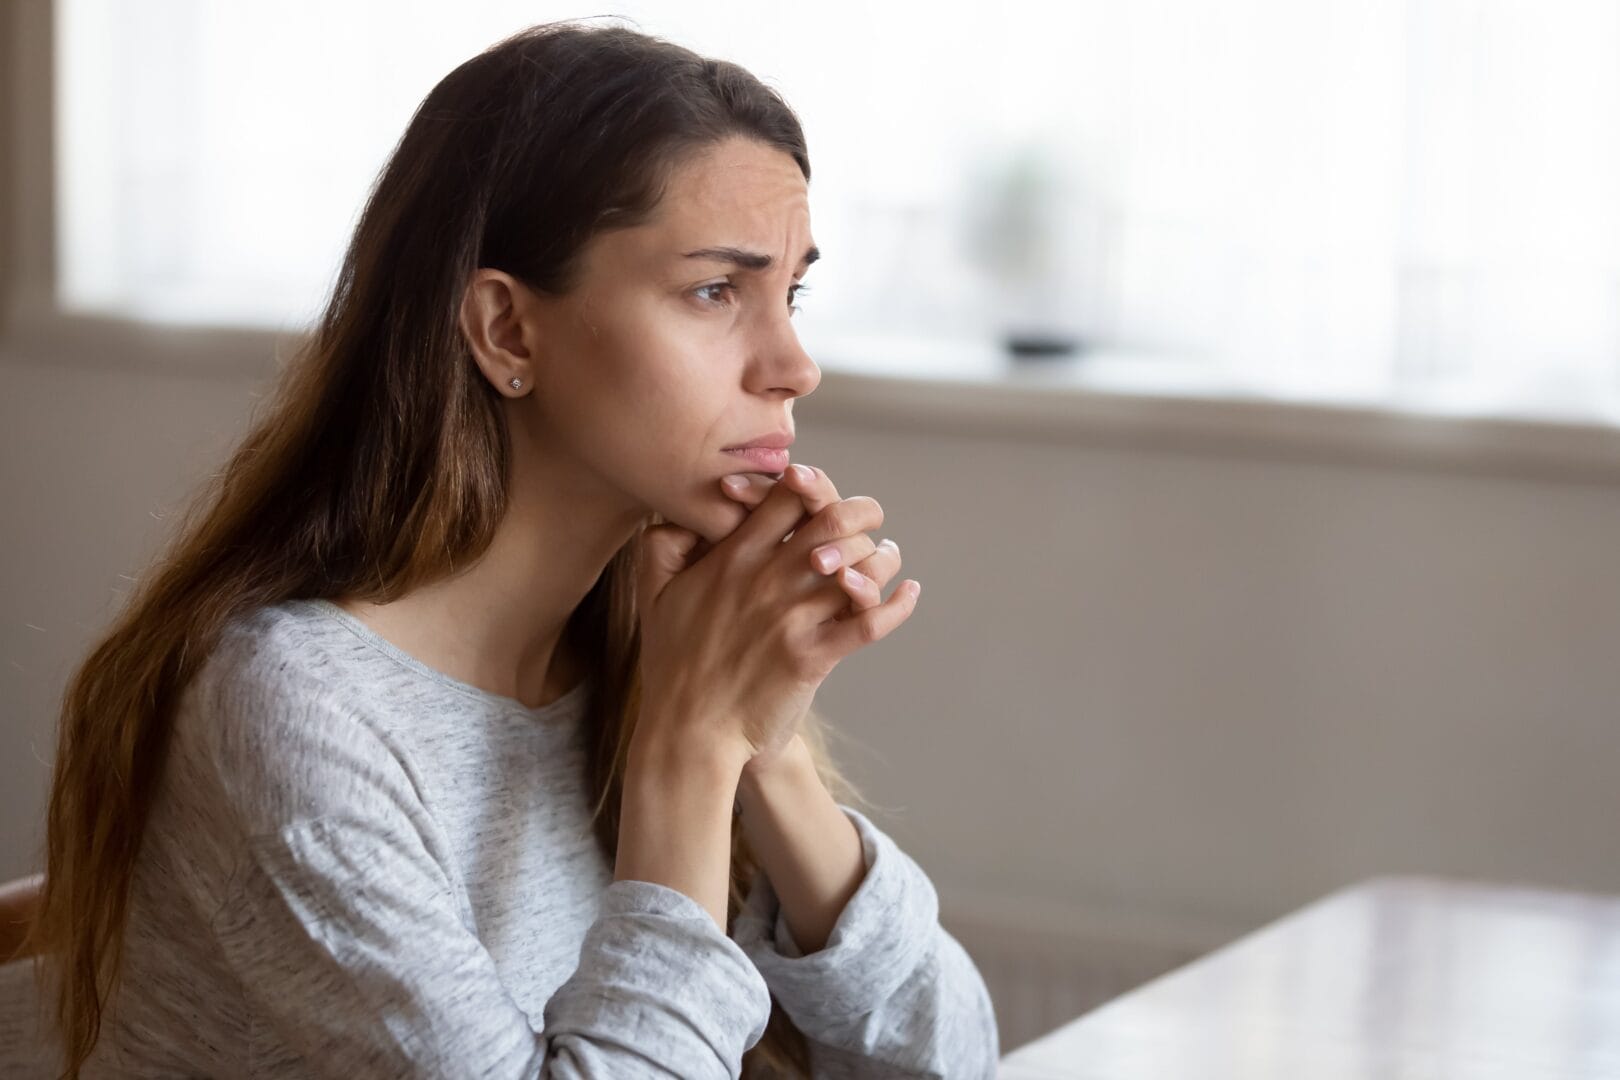 Woman can't go to work because of crippling anxiety